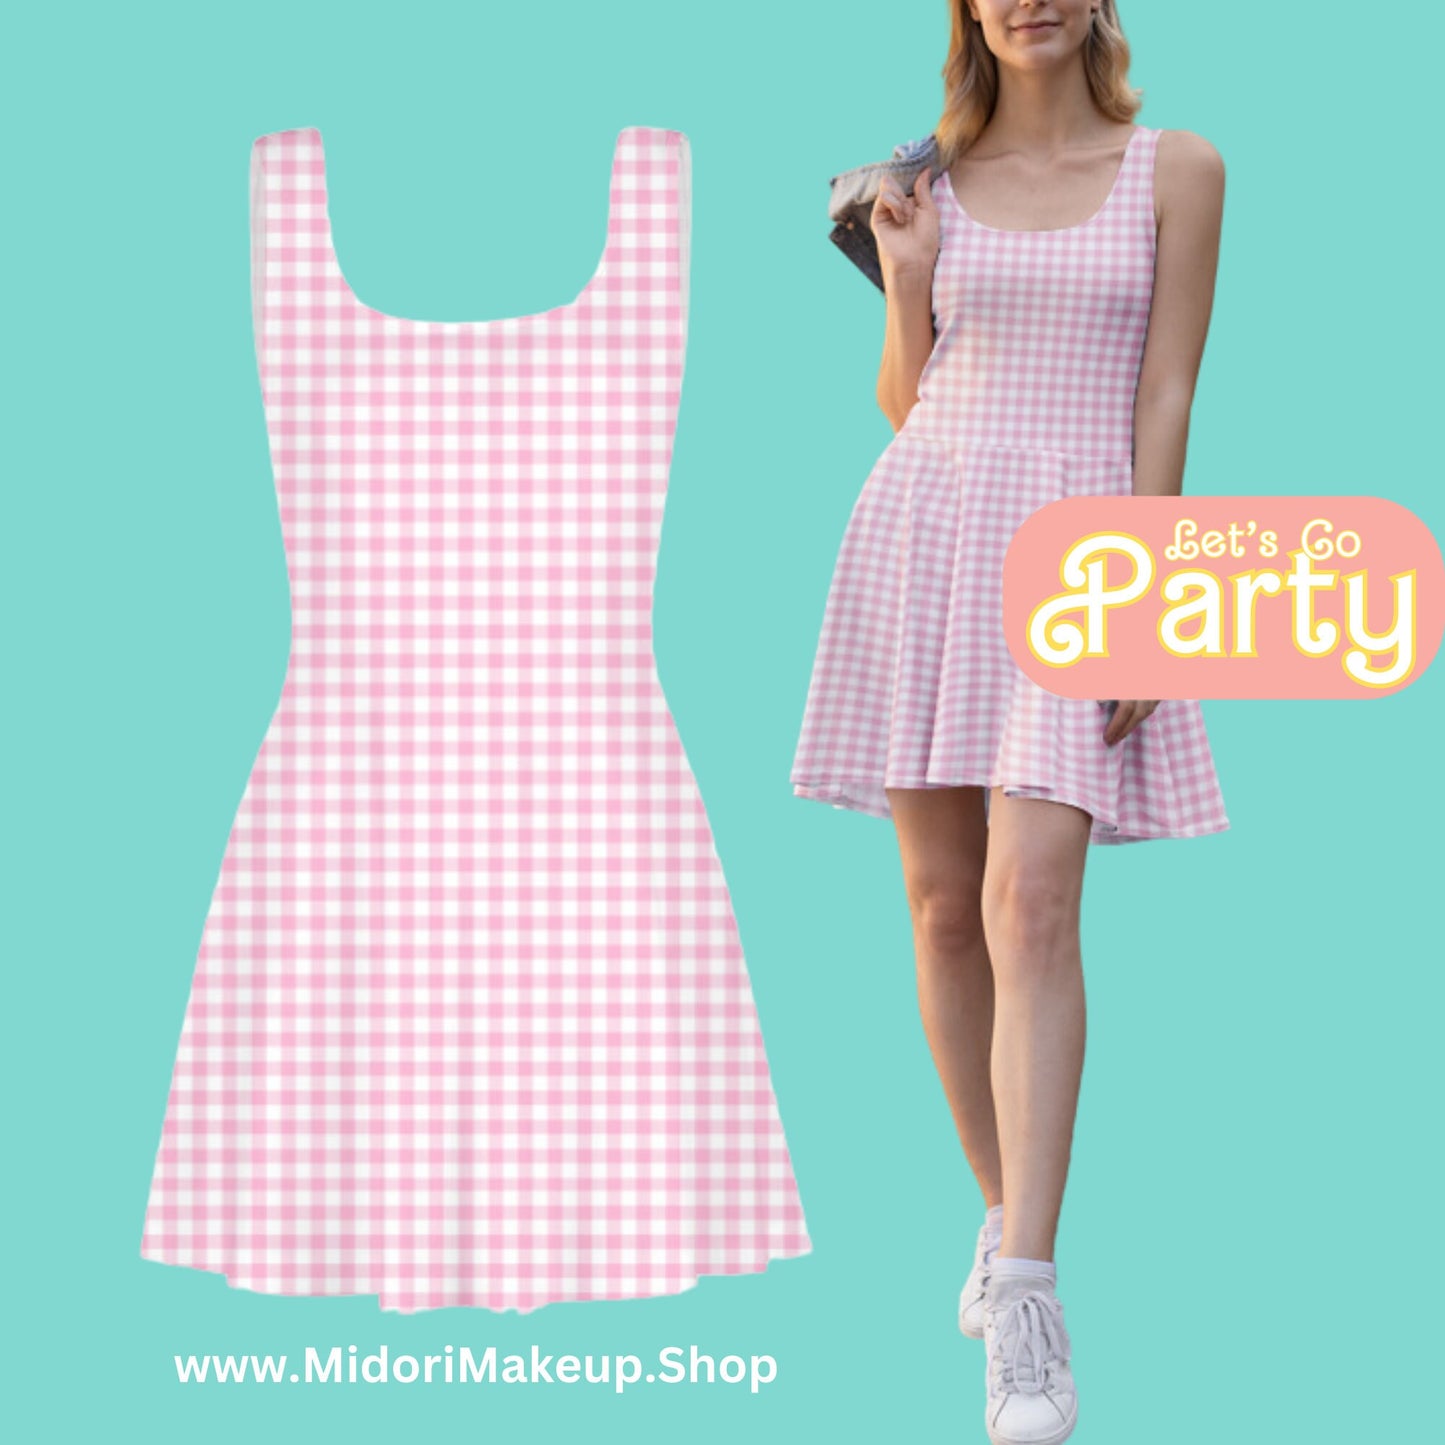 Y2K 90s Pink Gingham Checkered Skater Dress Sleeveless Fit Flare Mini Checkered Retro Cruise Wear Gift Cmon Lets Go Party Group Doll Costume